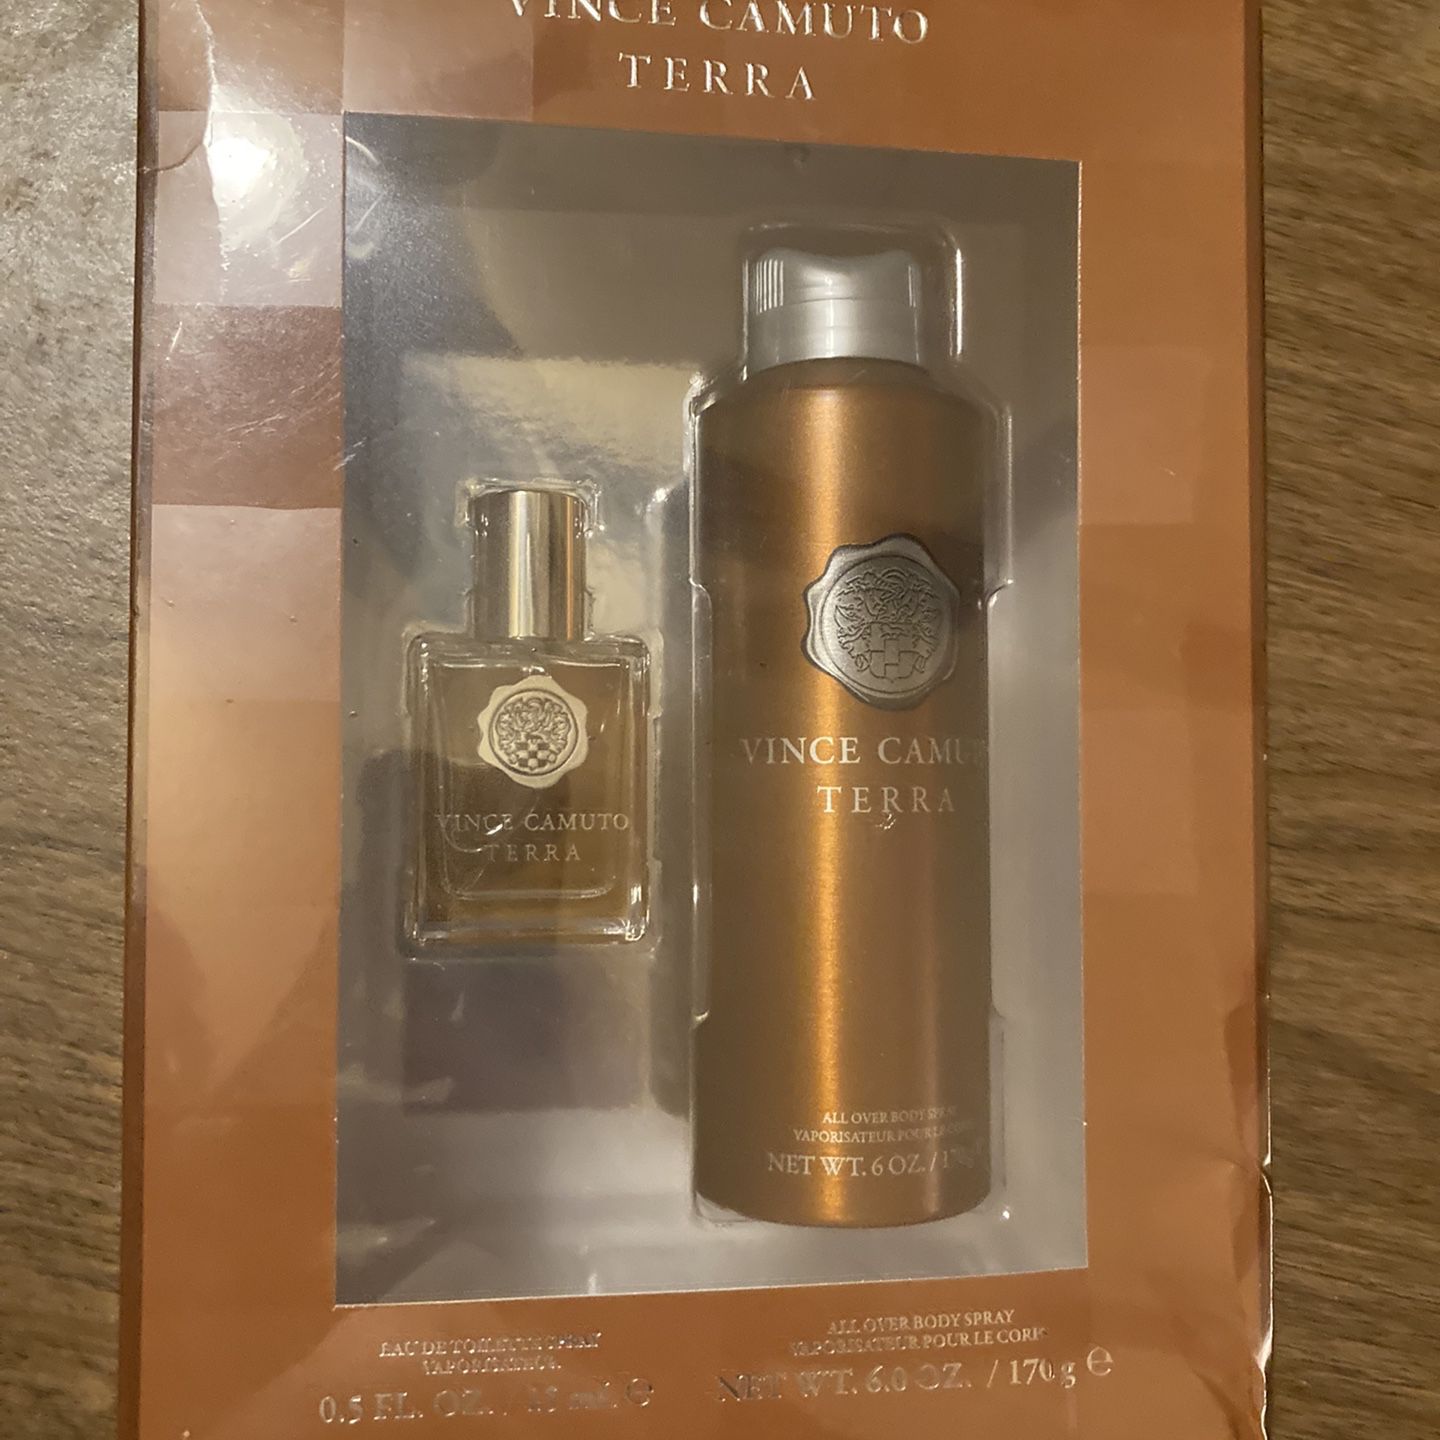 Vince Camuto Terra Men's Cologne & Body Spray Gift Set for Sale in  Montclair, CA - OfferUp